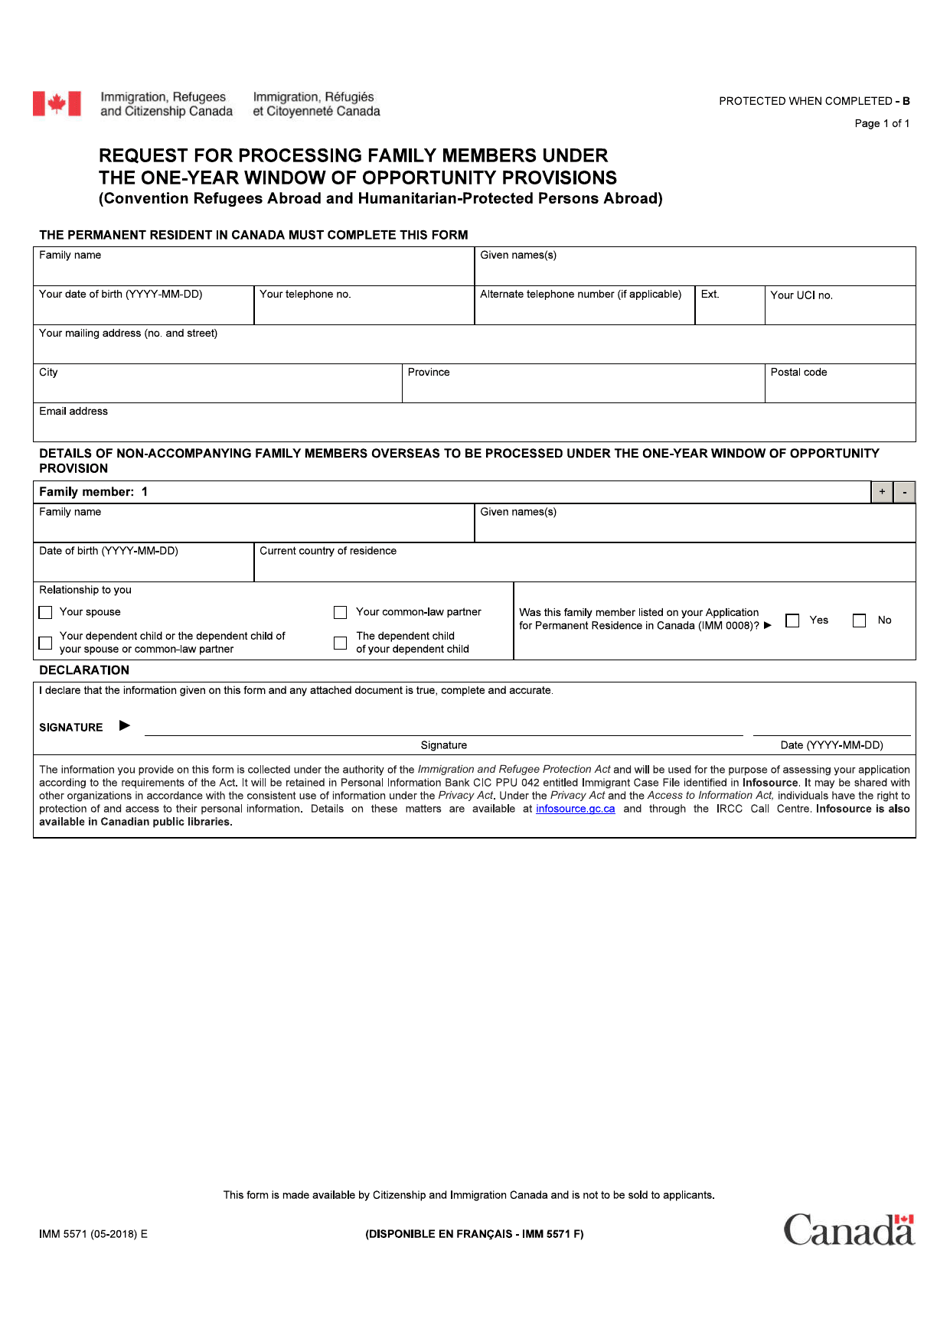 form-imm5571-download-fillable-pdf-or-fill-online-request-for